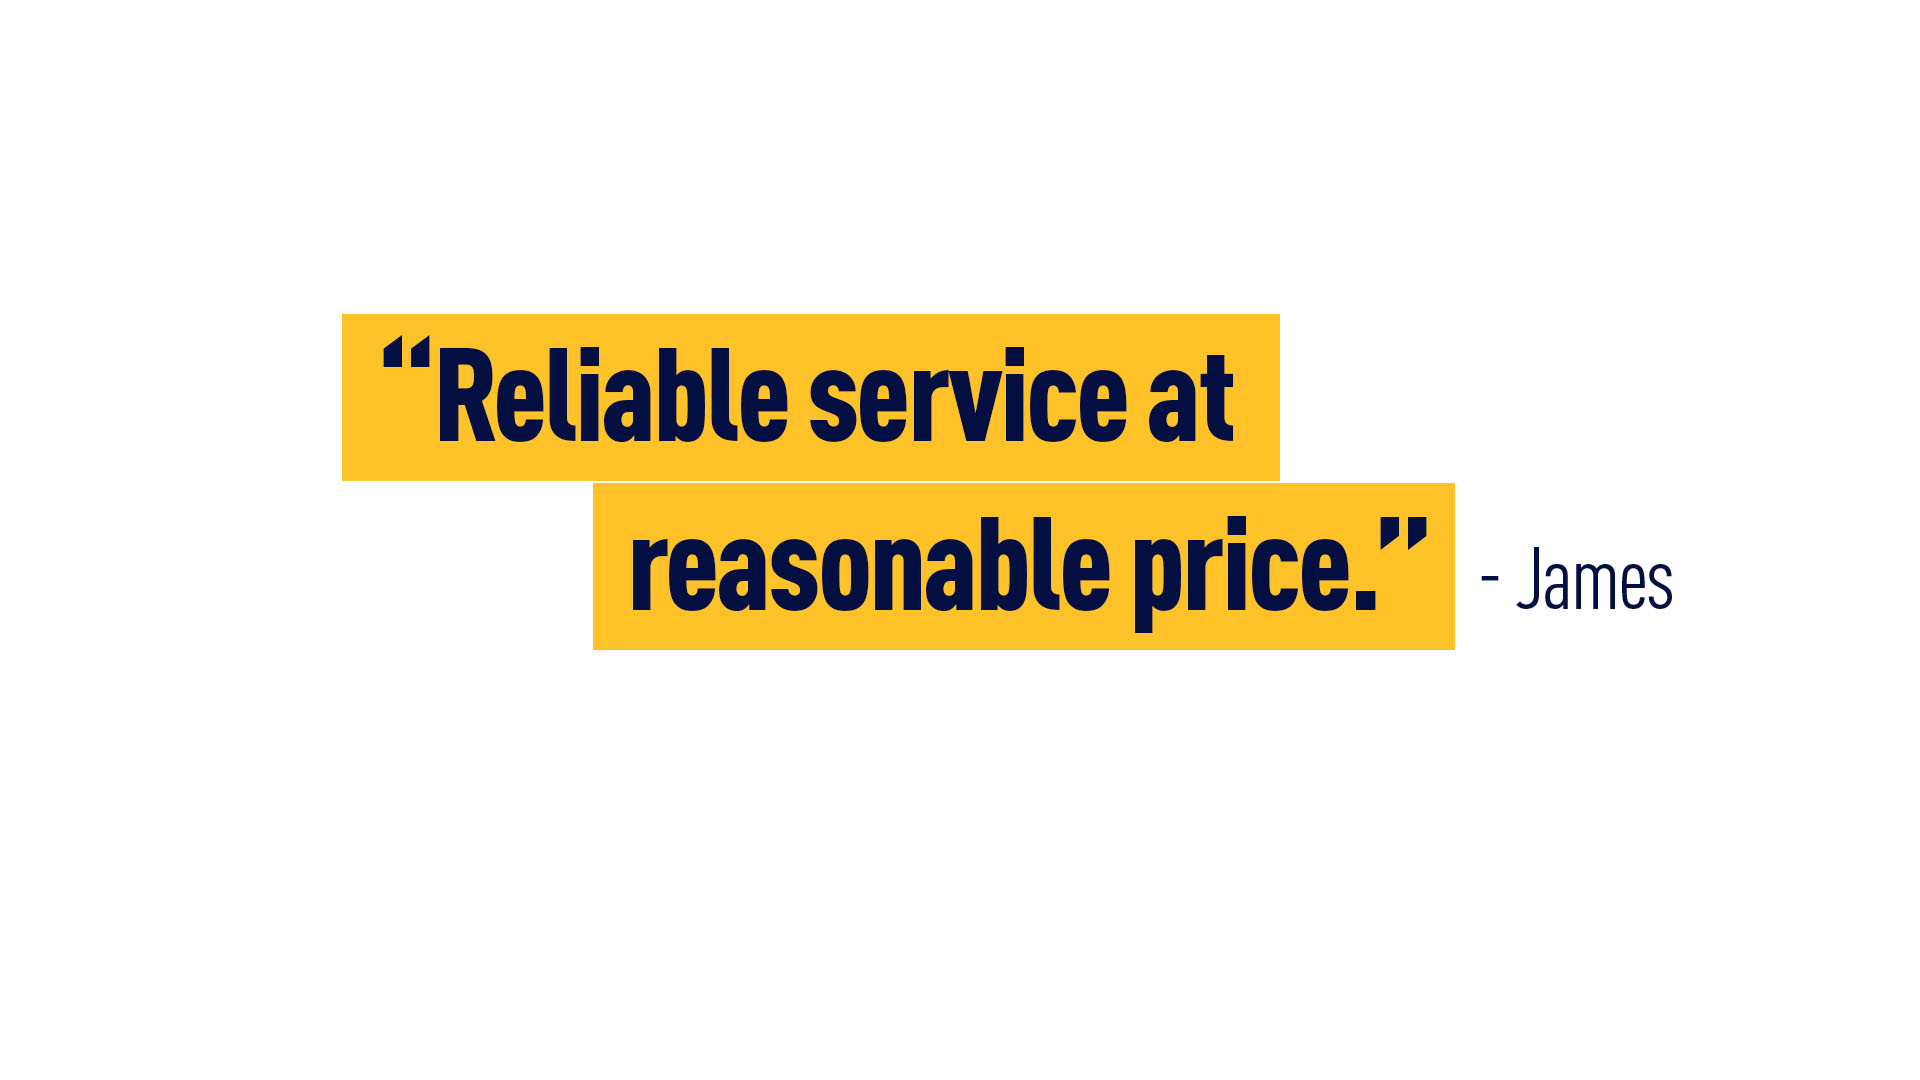 James – “Reliable service at reasonable price.”